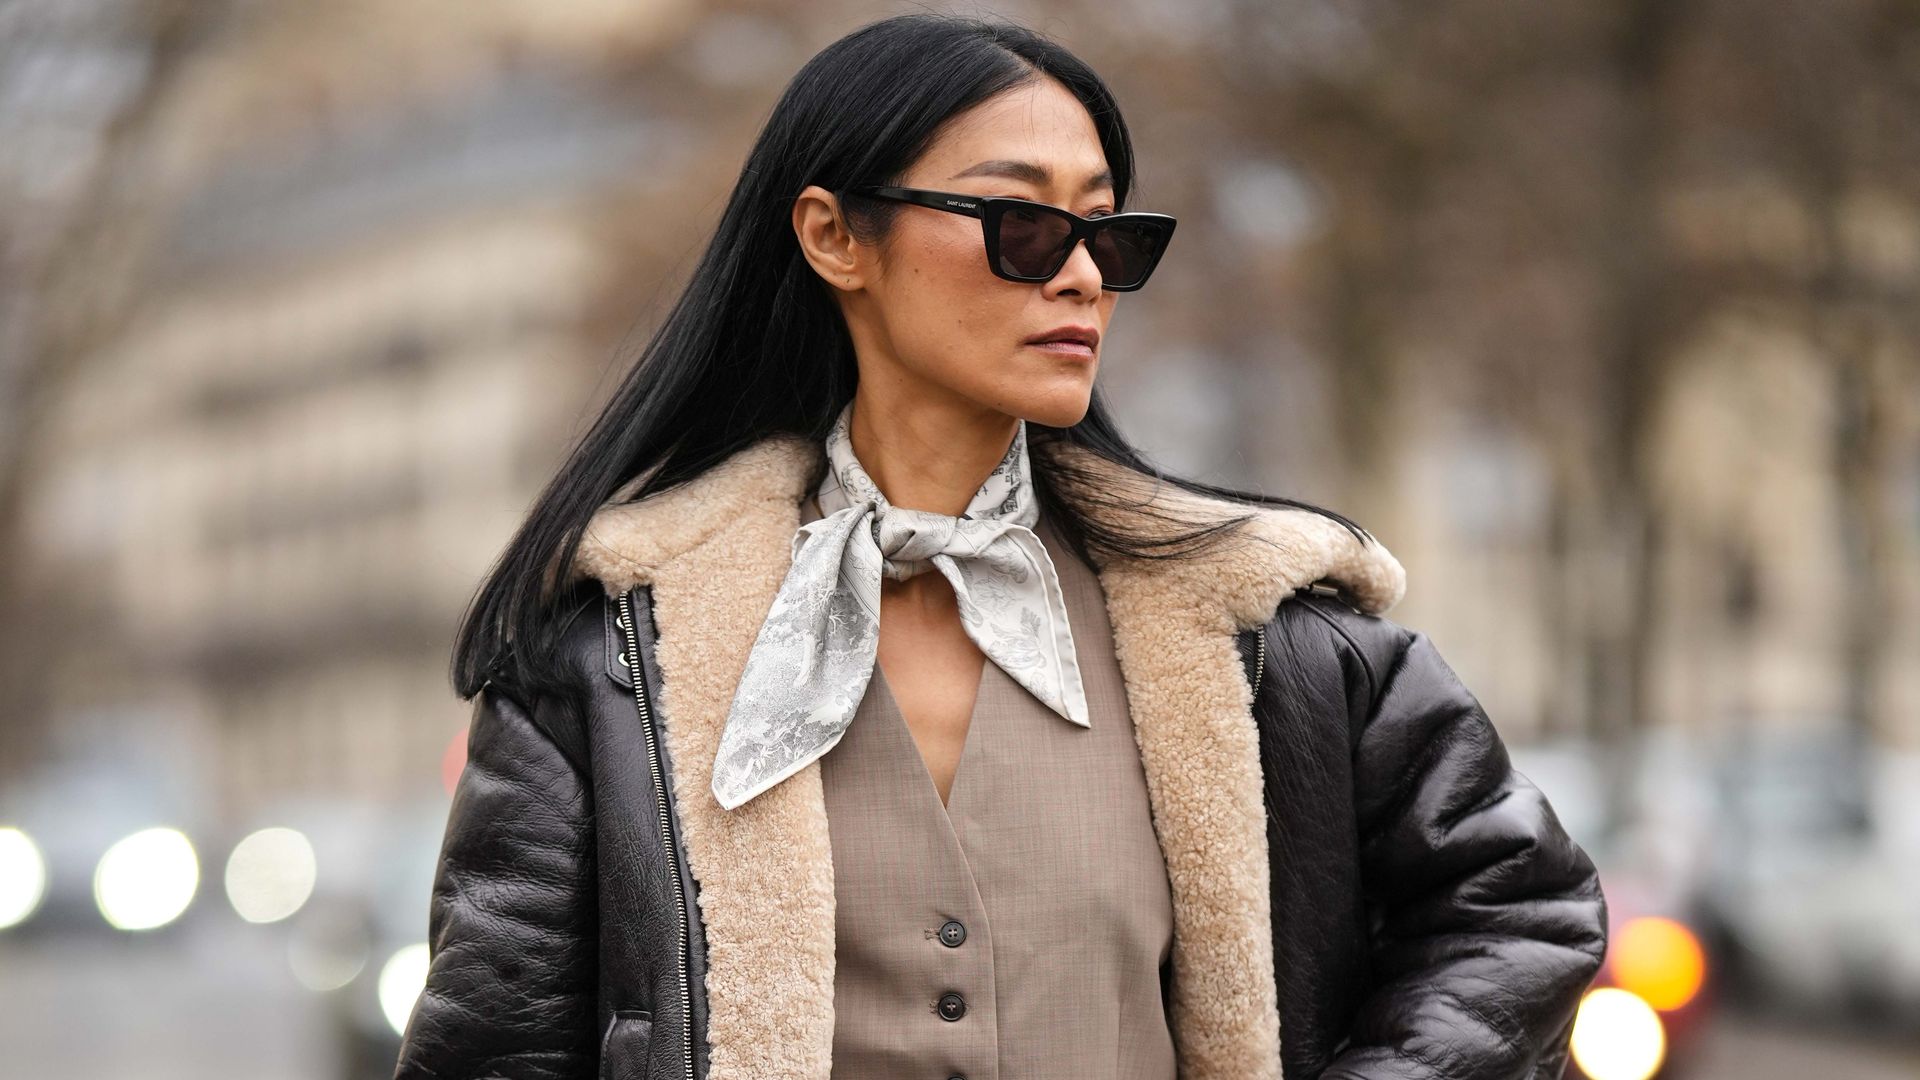 7 Leather Bomber Jackets To Stay Warm in the Coolest Way This Season